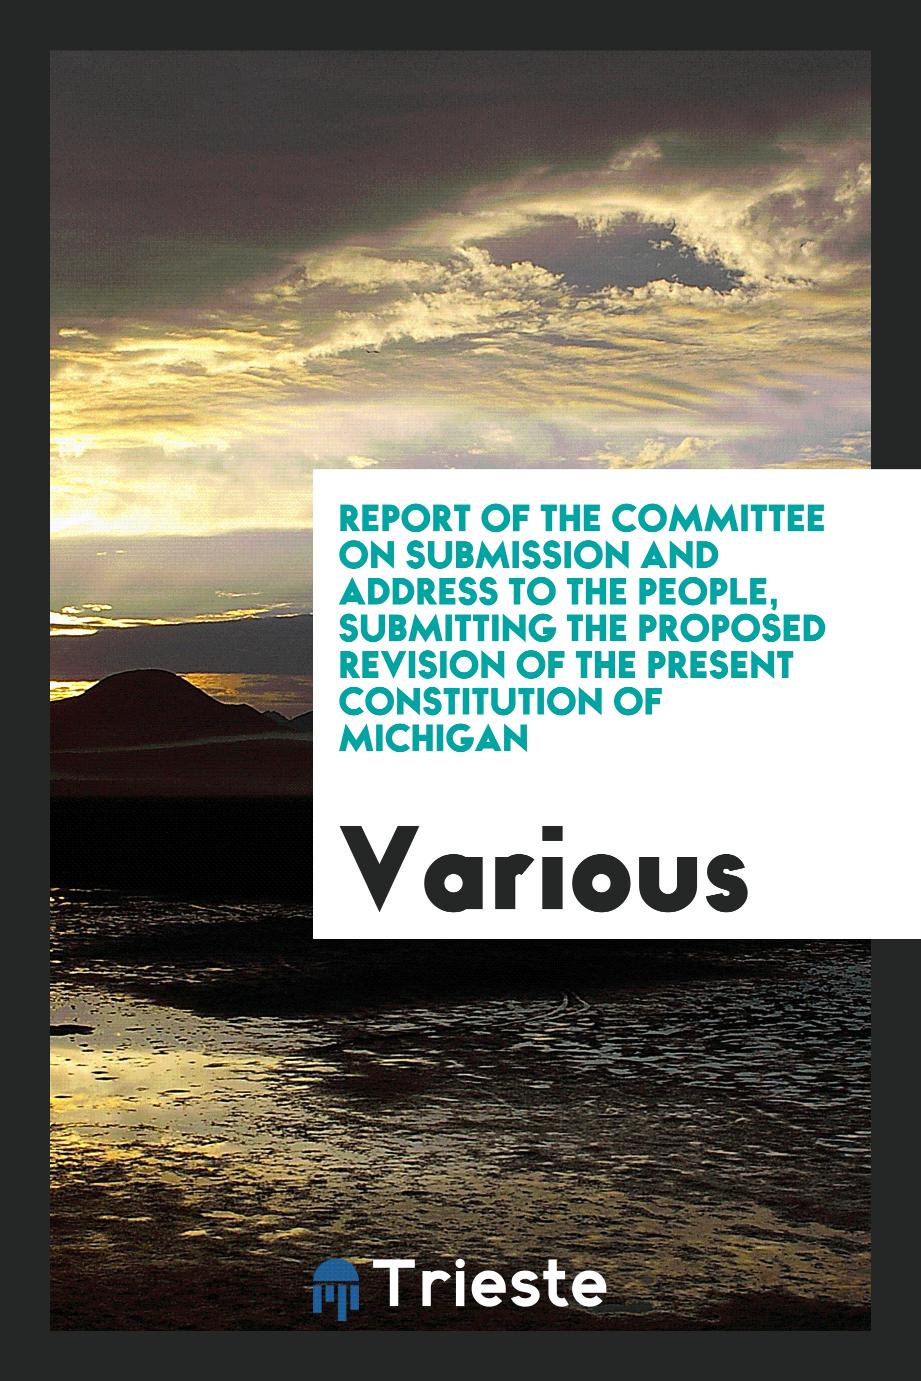 Report of the Committee on submission and address to the people, submitting the proposed revision of the present constitution of Michigan